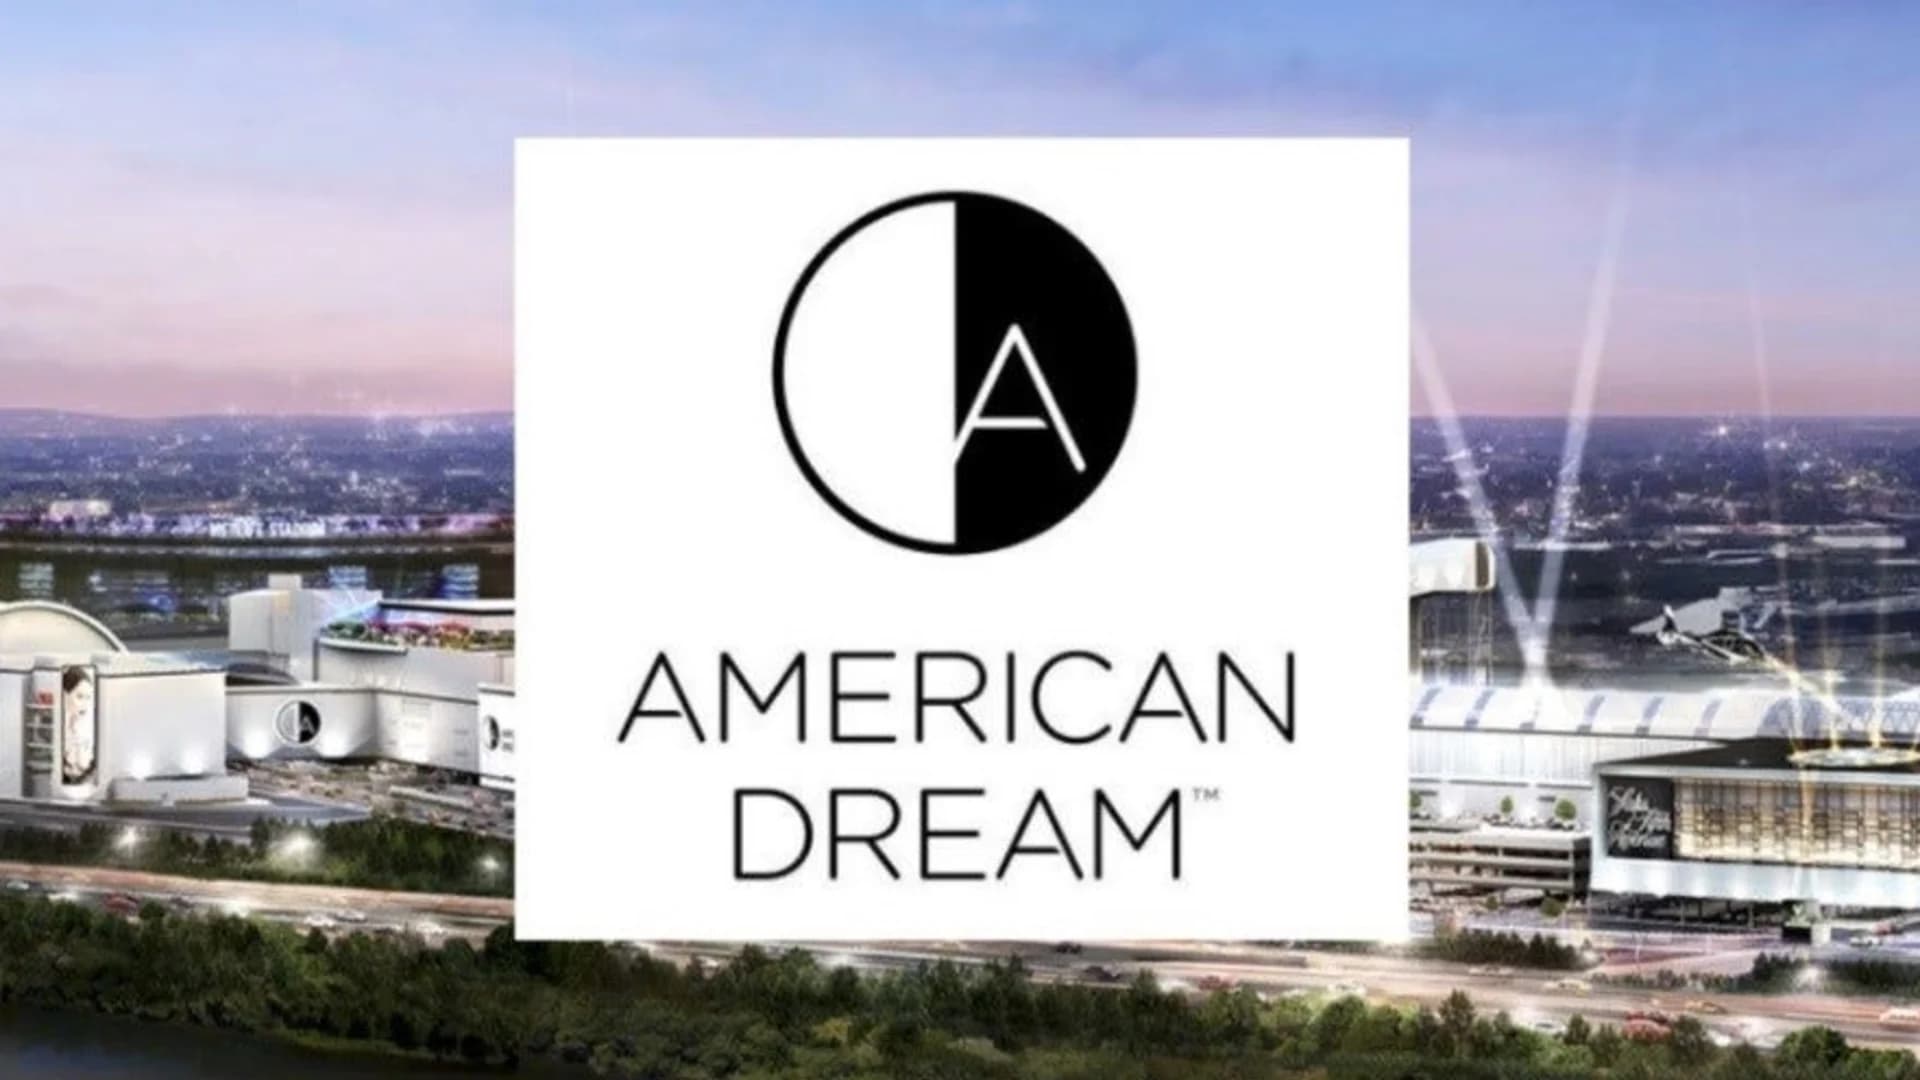 GUIDE: The American Dream opening. Here is everything you need to know